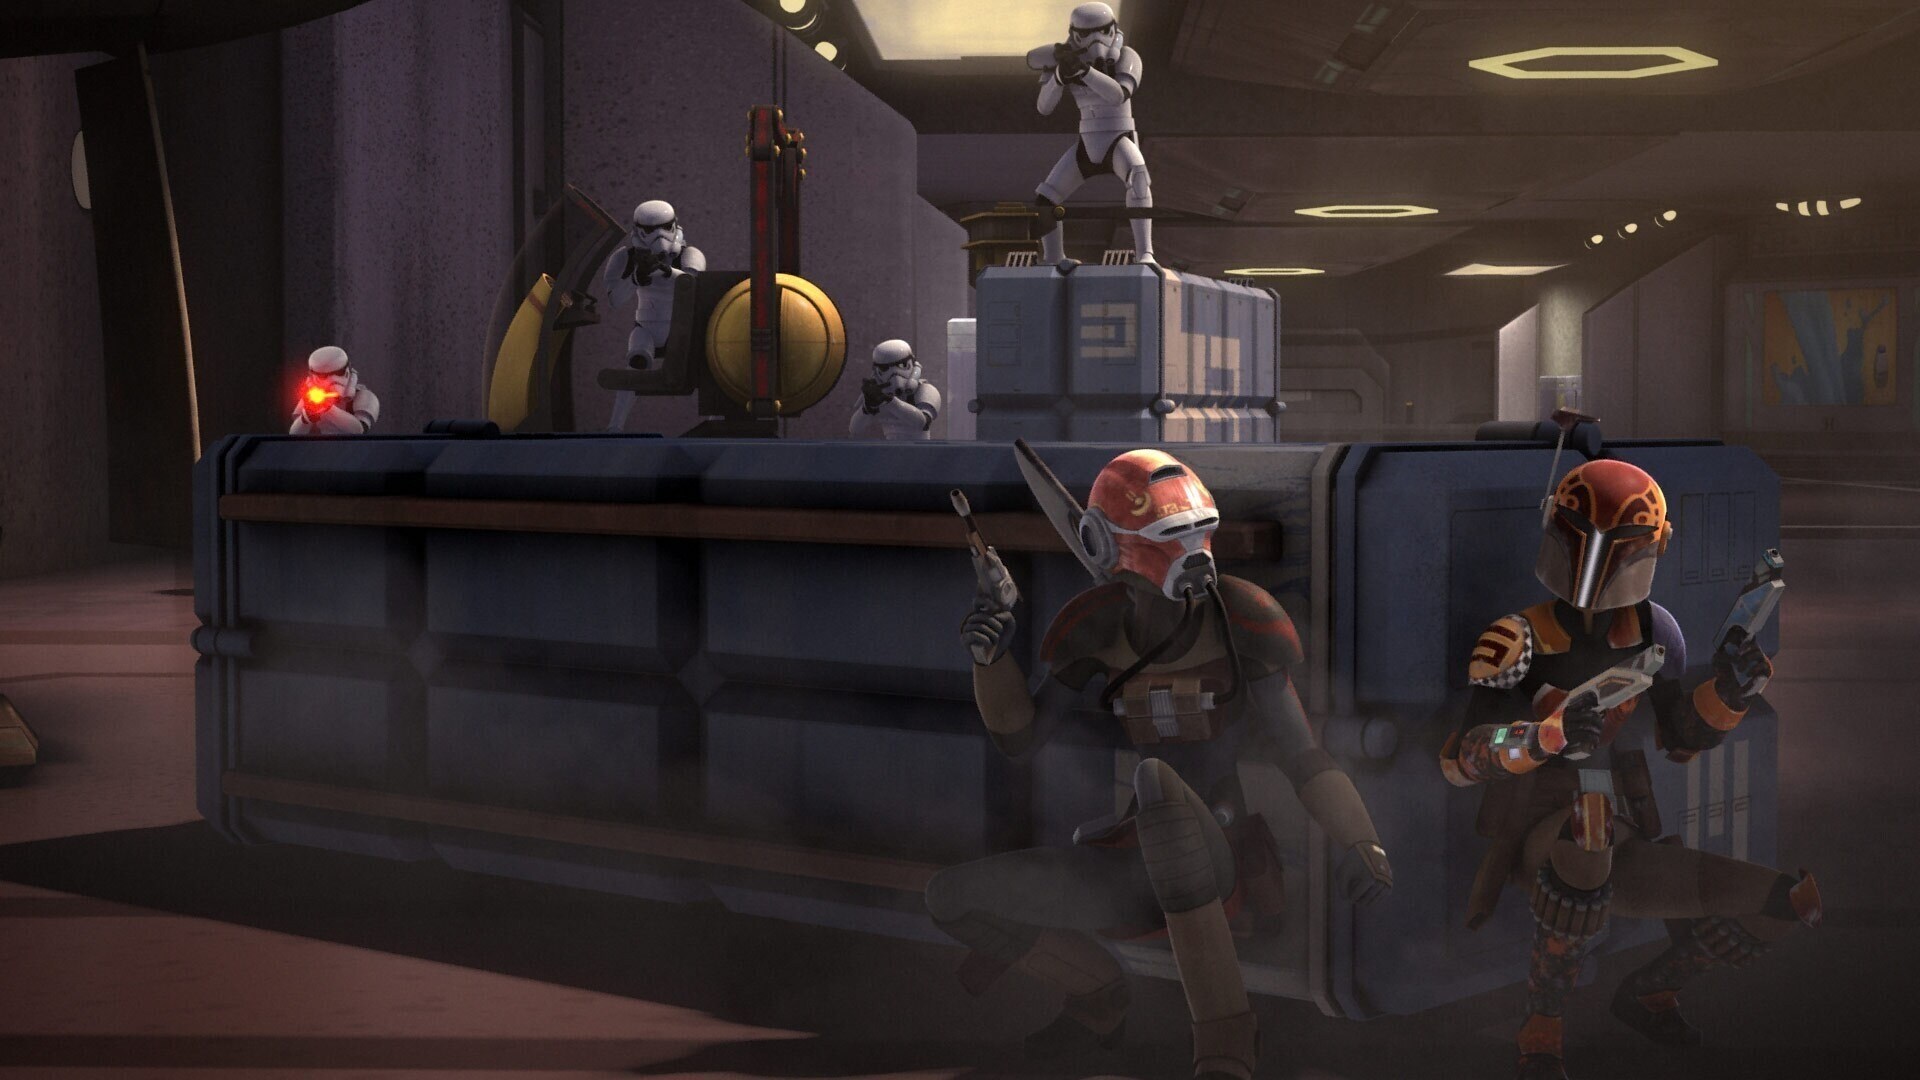 Sabine and Ketsu hiding from Stormtroops with blasters